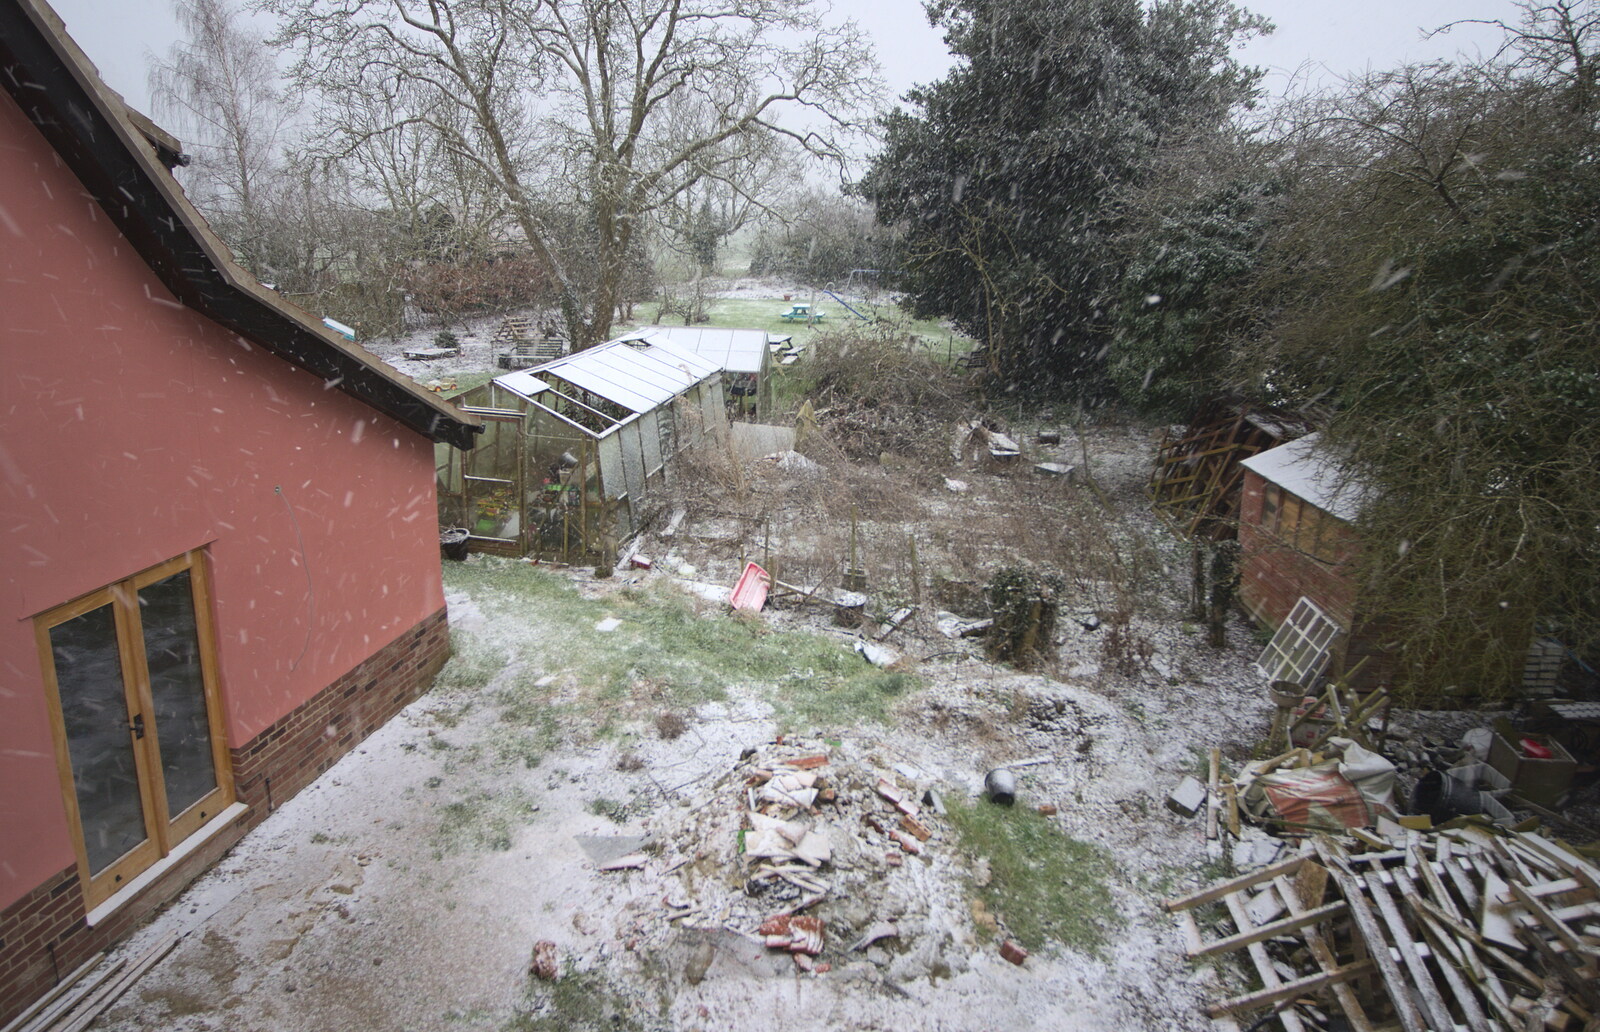 It snows briefly from Fred and the Volcano, Brome, Suffolk - 8th February 2015